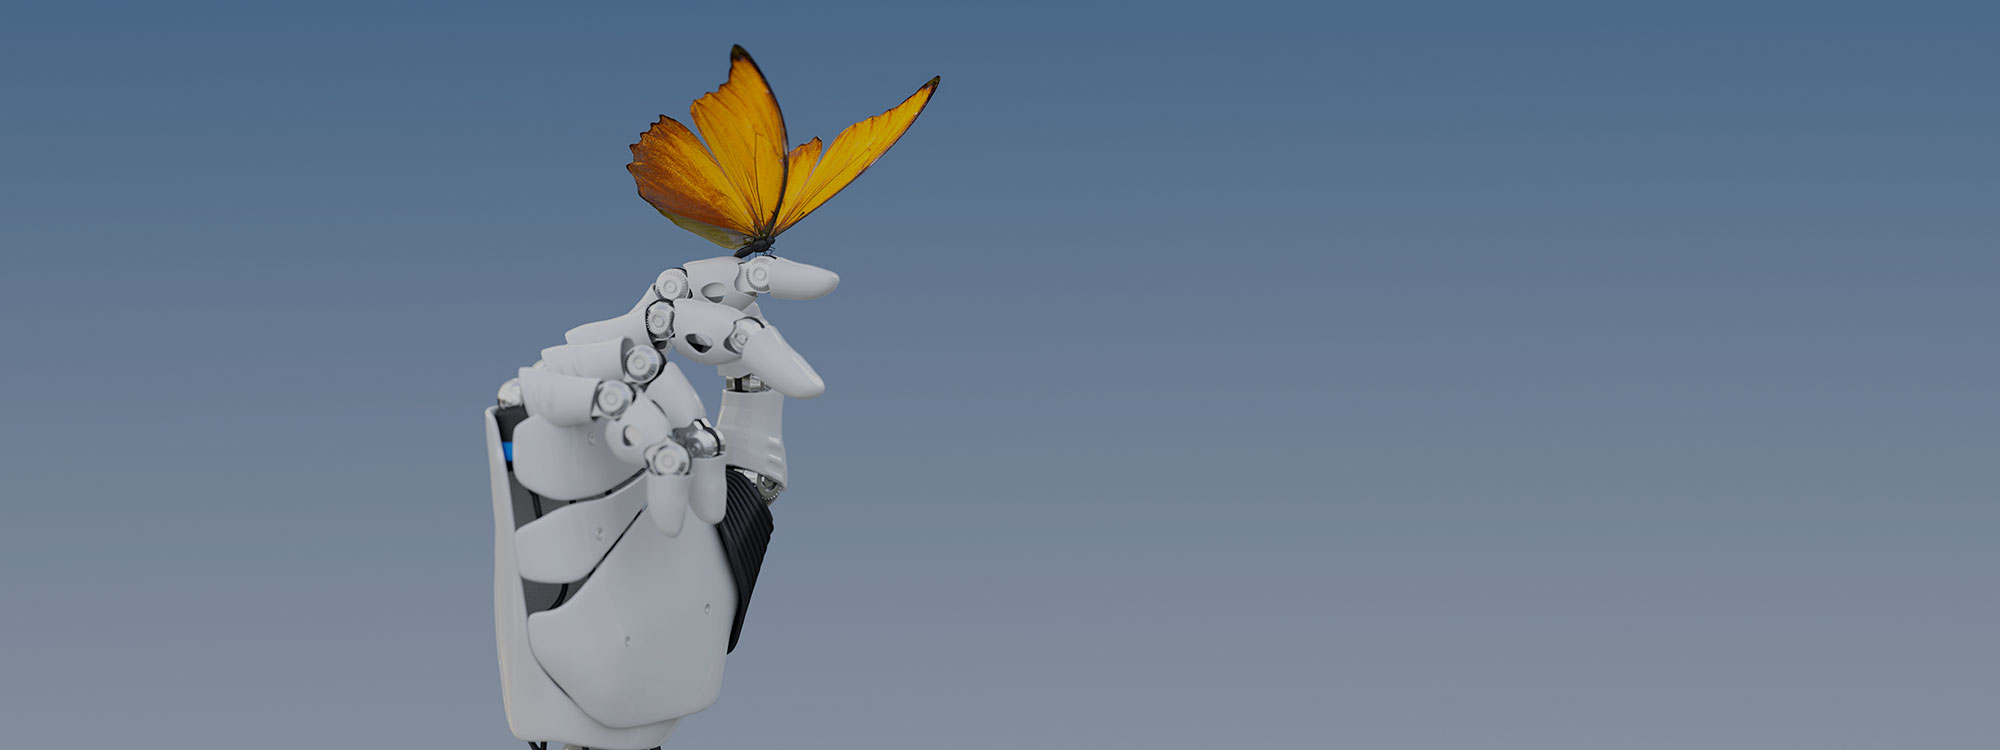 A robotic hand holds a vibrant orange butterfly against a gradient blue sky background.